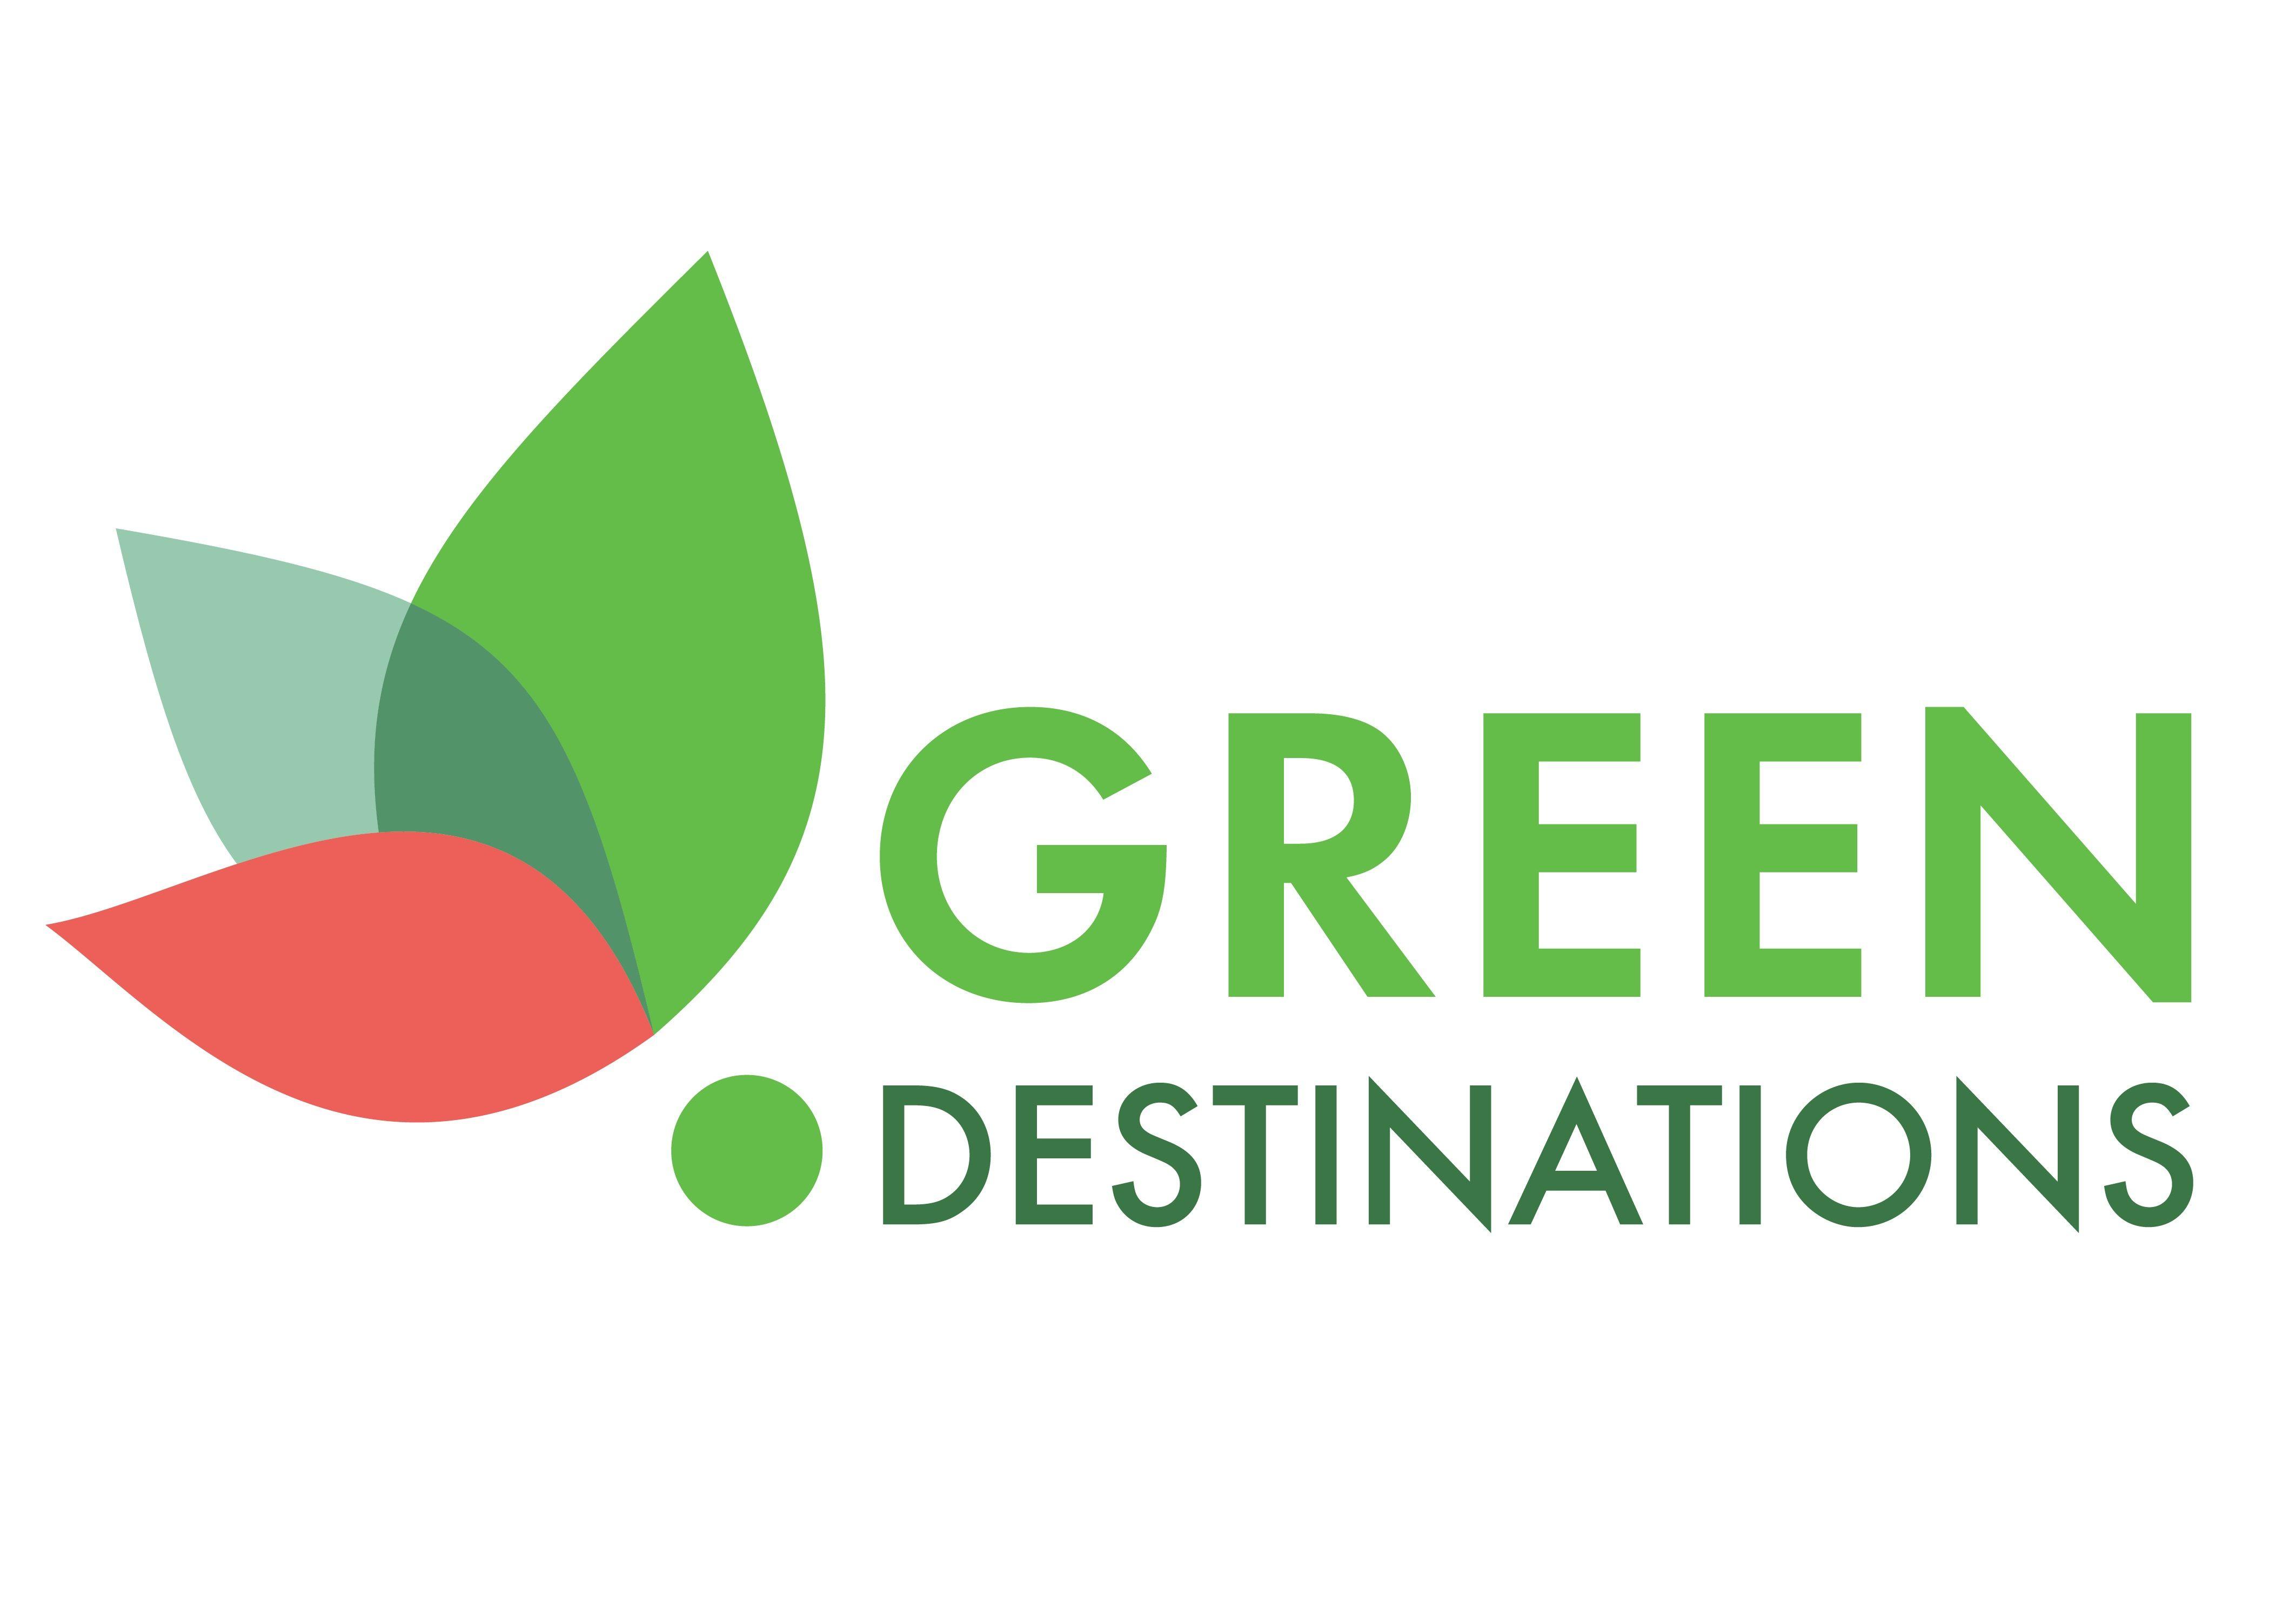 Green Logo - Green Destinations | Top 100 - Competition for Sustainable Tourism ...